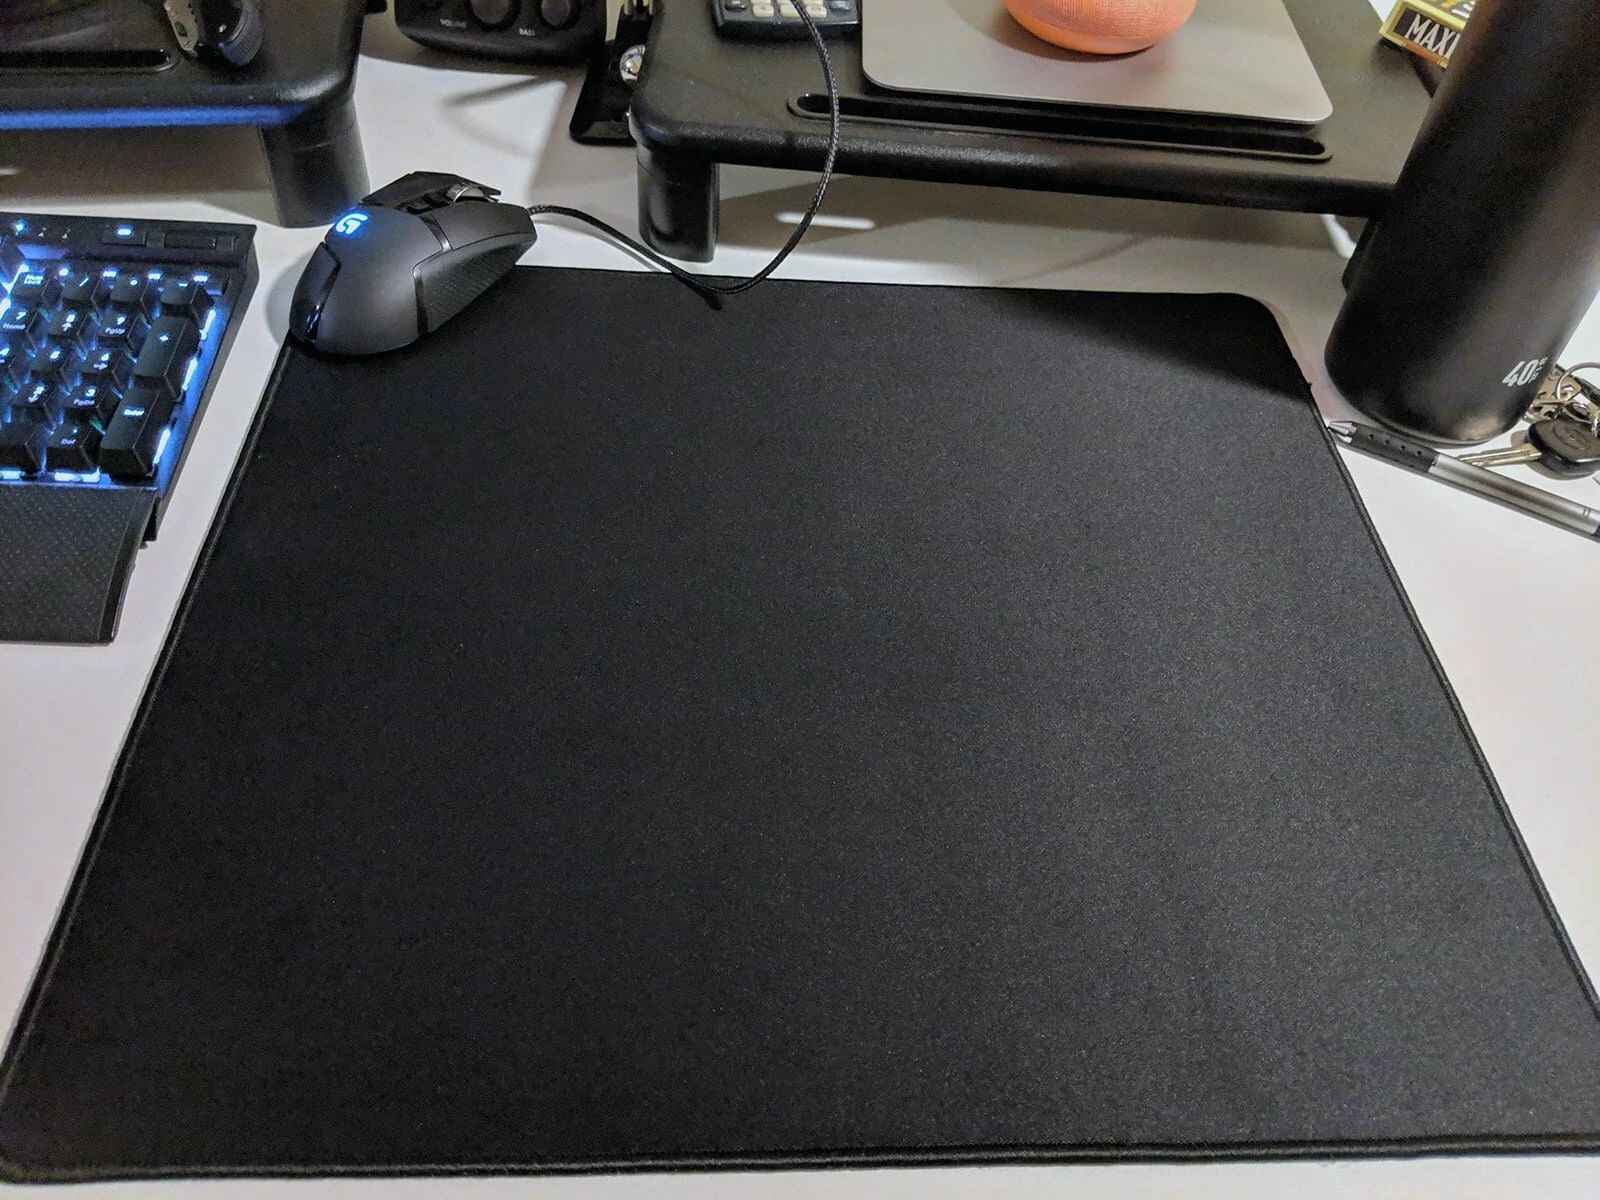 How To Get Rid Of Dead Skin On A Mouse Pad